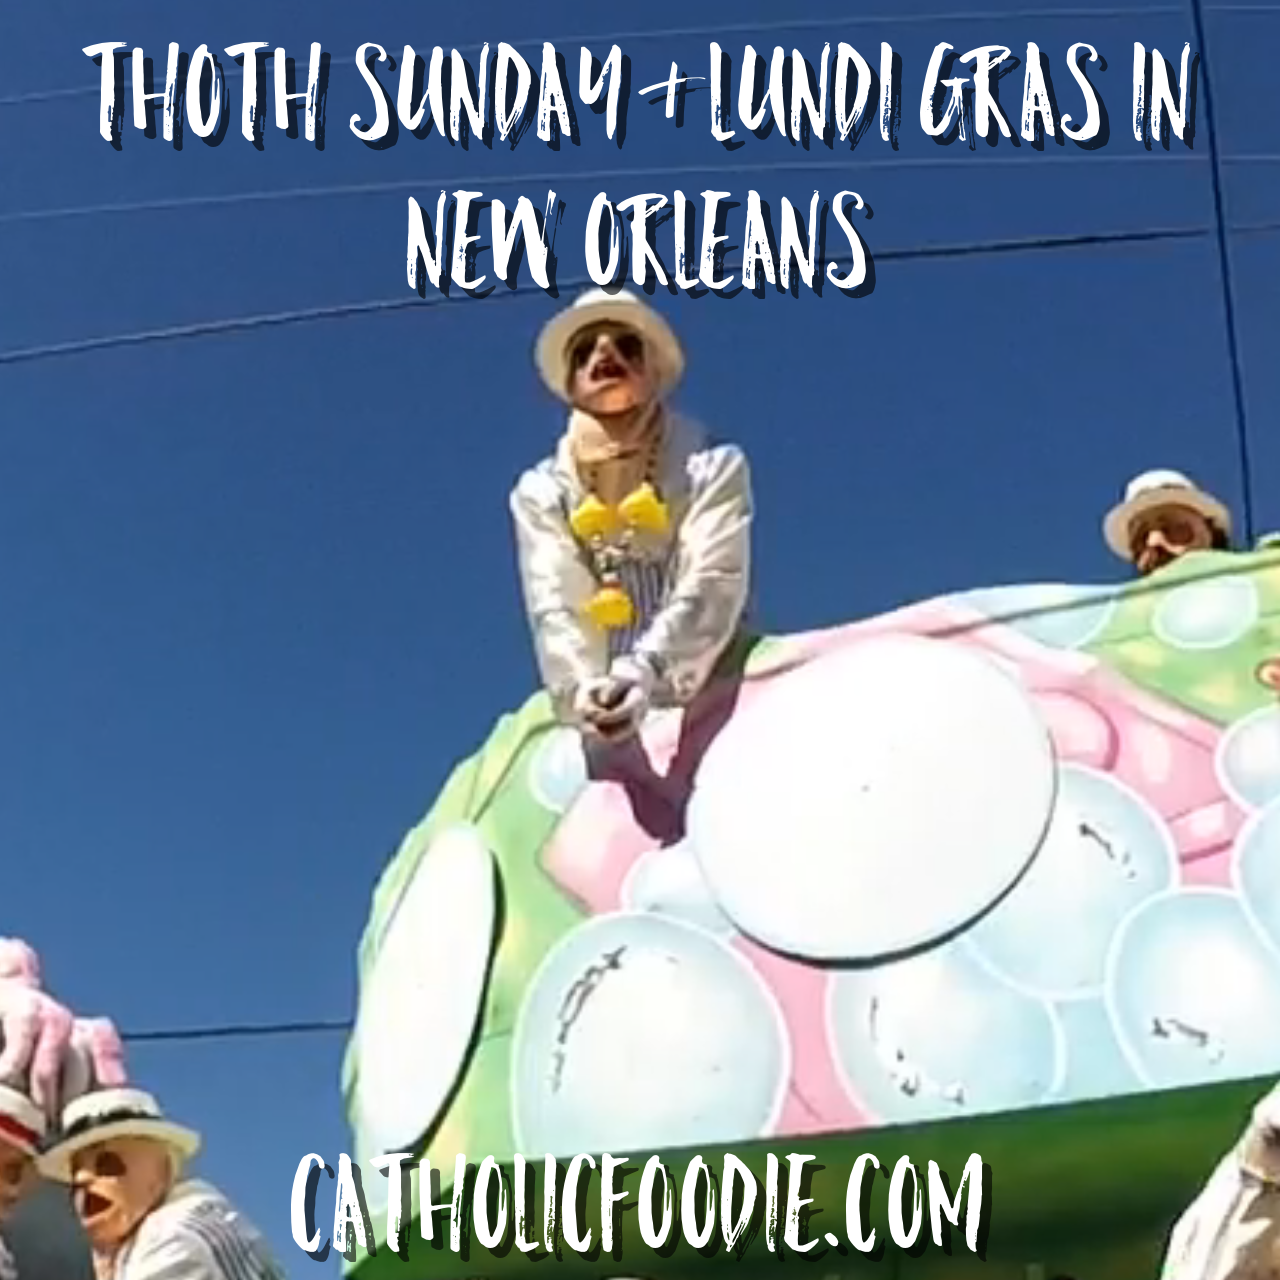 Thoth Sunday, Lundi Gras and Mardi Gras in New Orleans